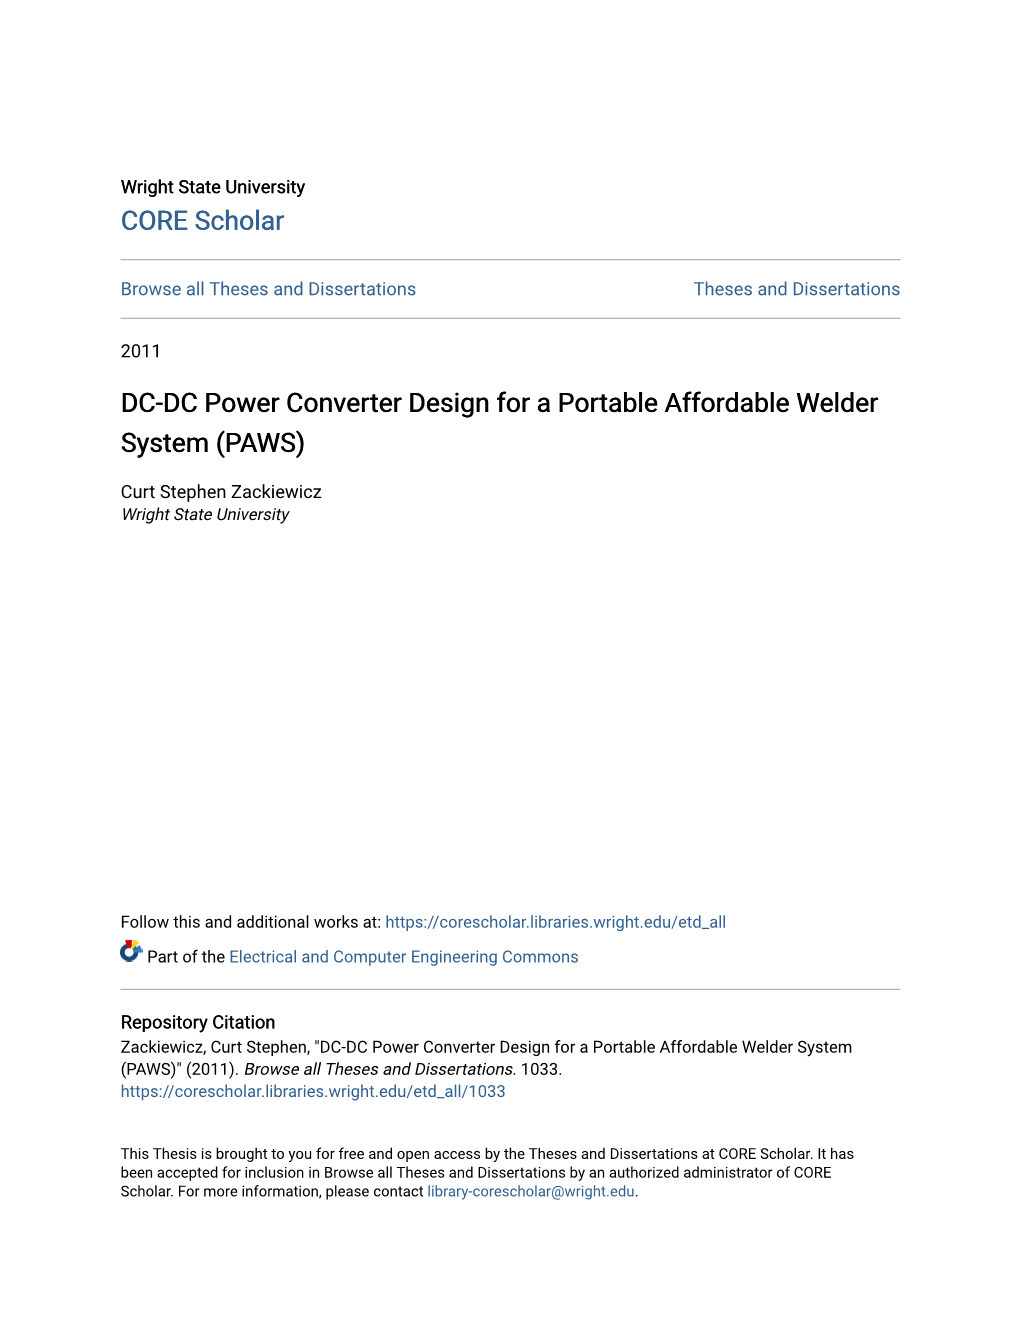 DC-DC Power Converter Design for a Portable Affordable Welder System (PAWS)